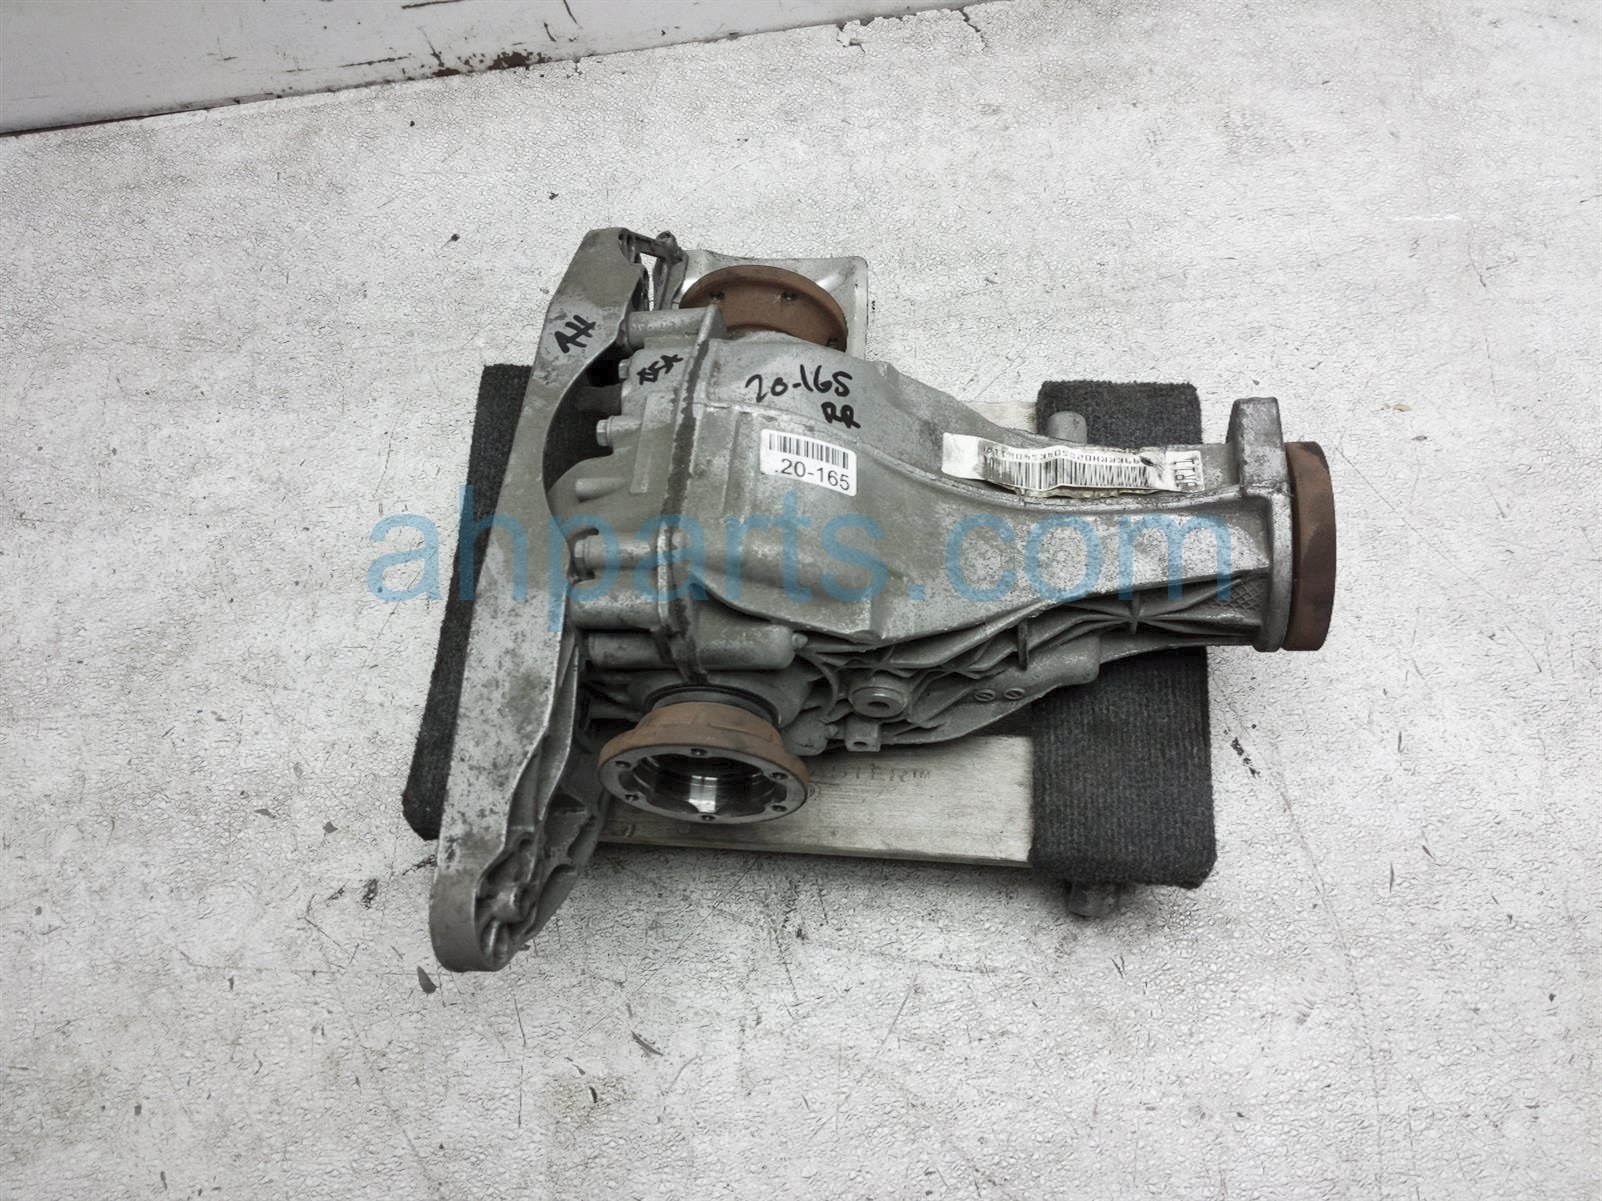 $175 Audi DIFFERENTIAL ASSEMBLY